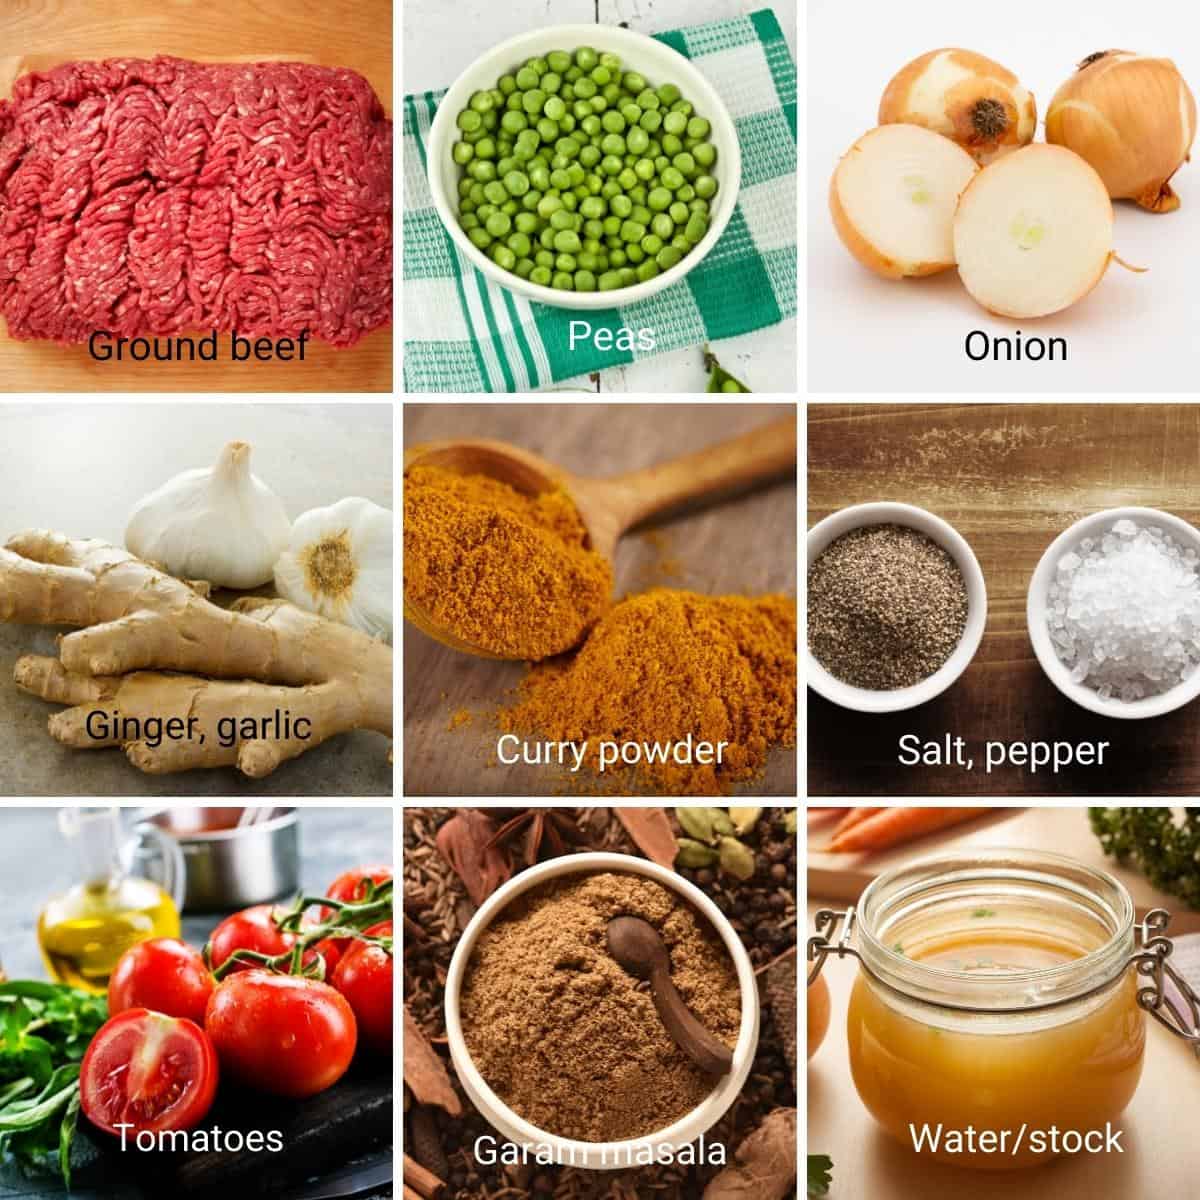 Ingredients for making minced curry with ground beef.